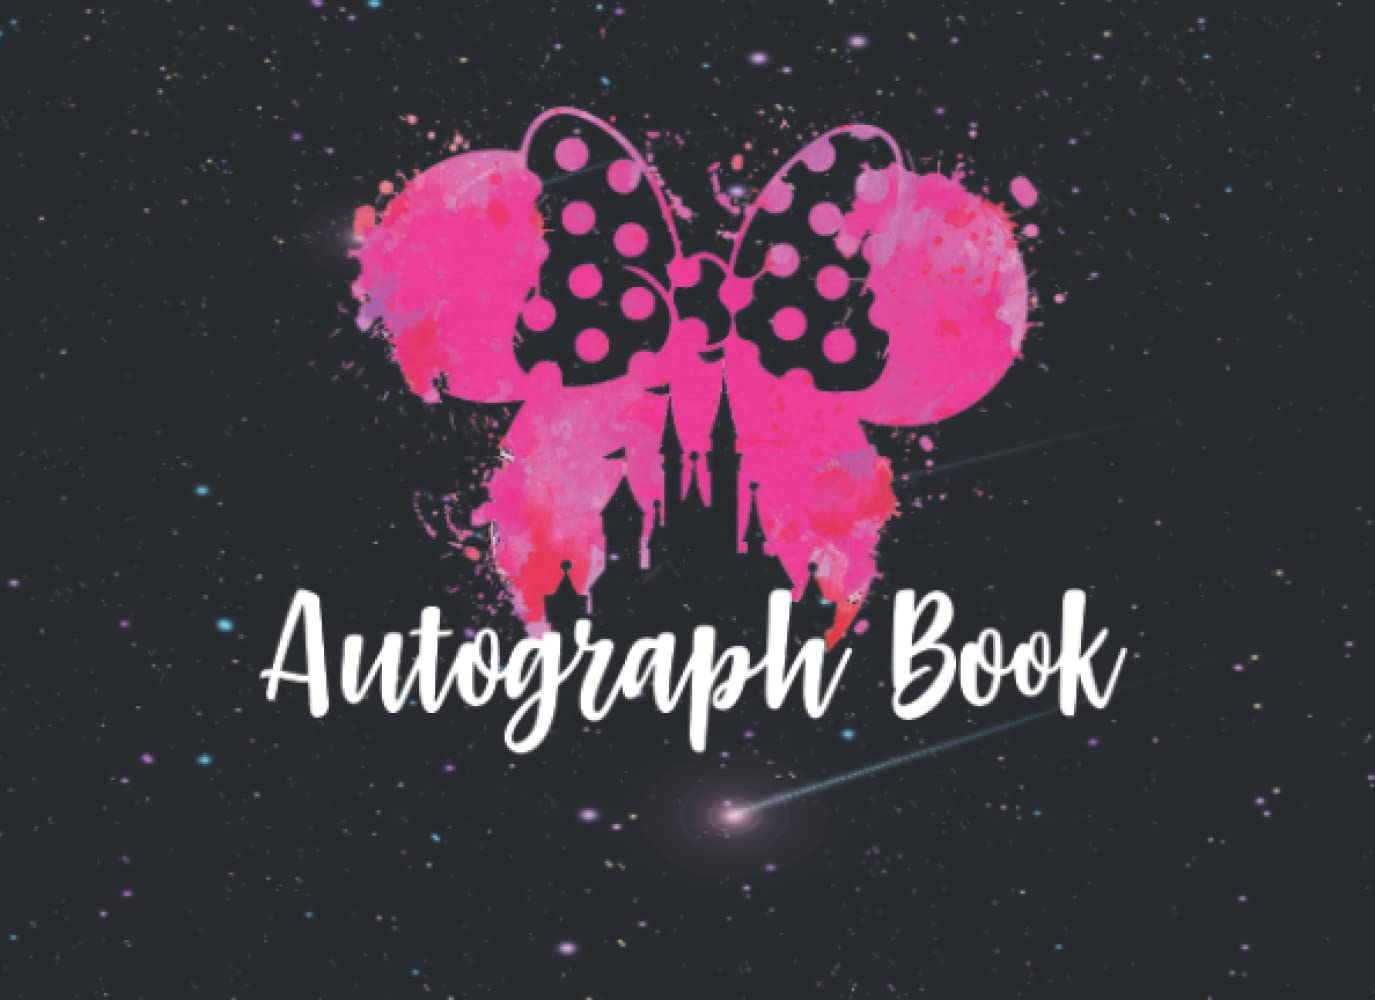 61uj9GY021L - Autograph Book: Collect Characters /Celebrities Signatures From Theme Park Adventures All Over The World. Keep all ... Double Page Fun For Kids, Girls & Boys 2023